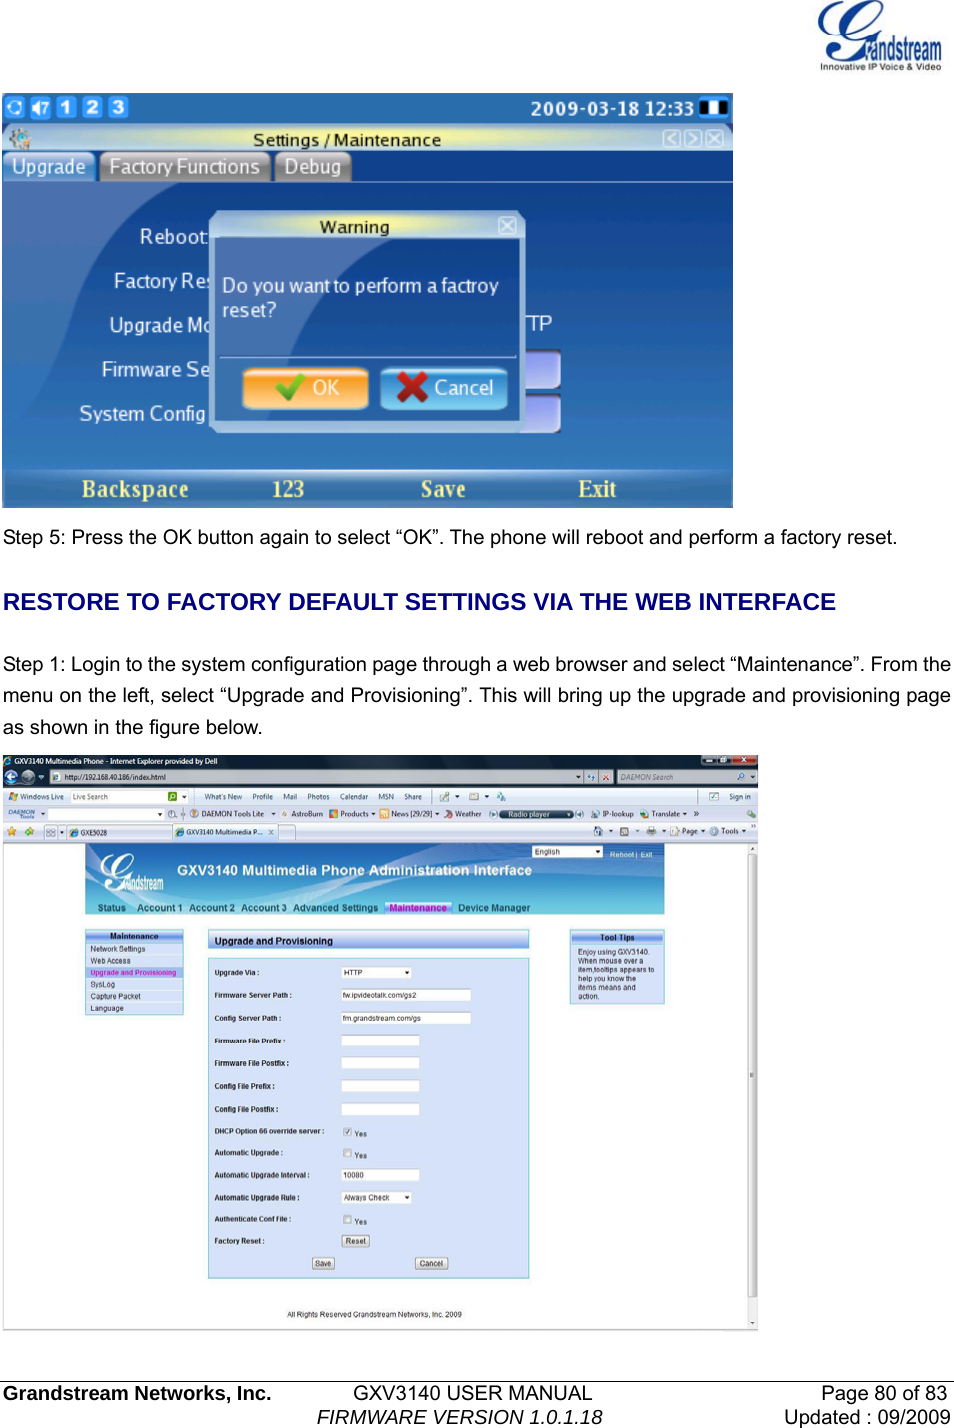   Grandstream Networks, Inc.        GXV3140 USER MANUAL                       Page 80 of 83                                FIRMWARE VERSION 1.0.1.18 Updated : 09/2009   Step 5: Press the OK button again to select “OK”. The phone will reboot and perform a factory reset.  RESTORE TO FACTORY DEFAULT SETTINGS VIA THE WEB INTERFACE    Step 1: Login to the system configuration page through a web browser and select “Maintenance”. From the menu on the left, select “Upgrade and Provisioning”. This will bring up the upgrade and provisioning page as shown in the figure below.  